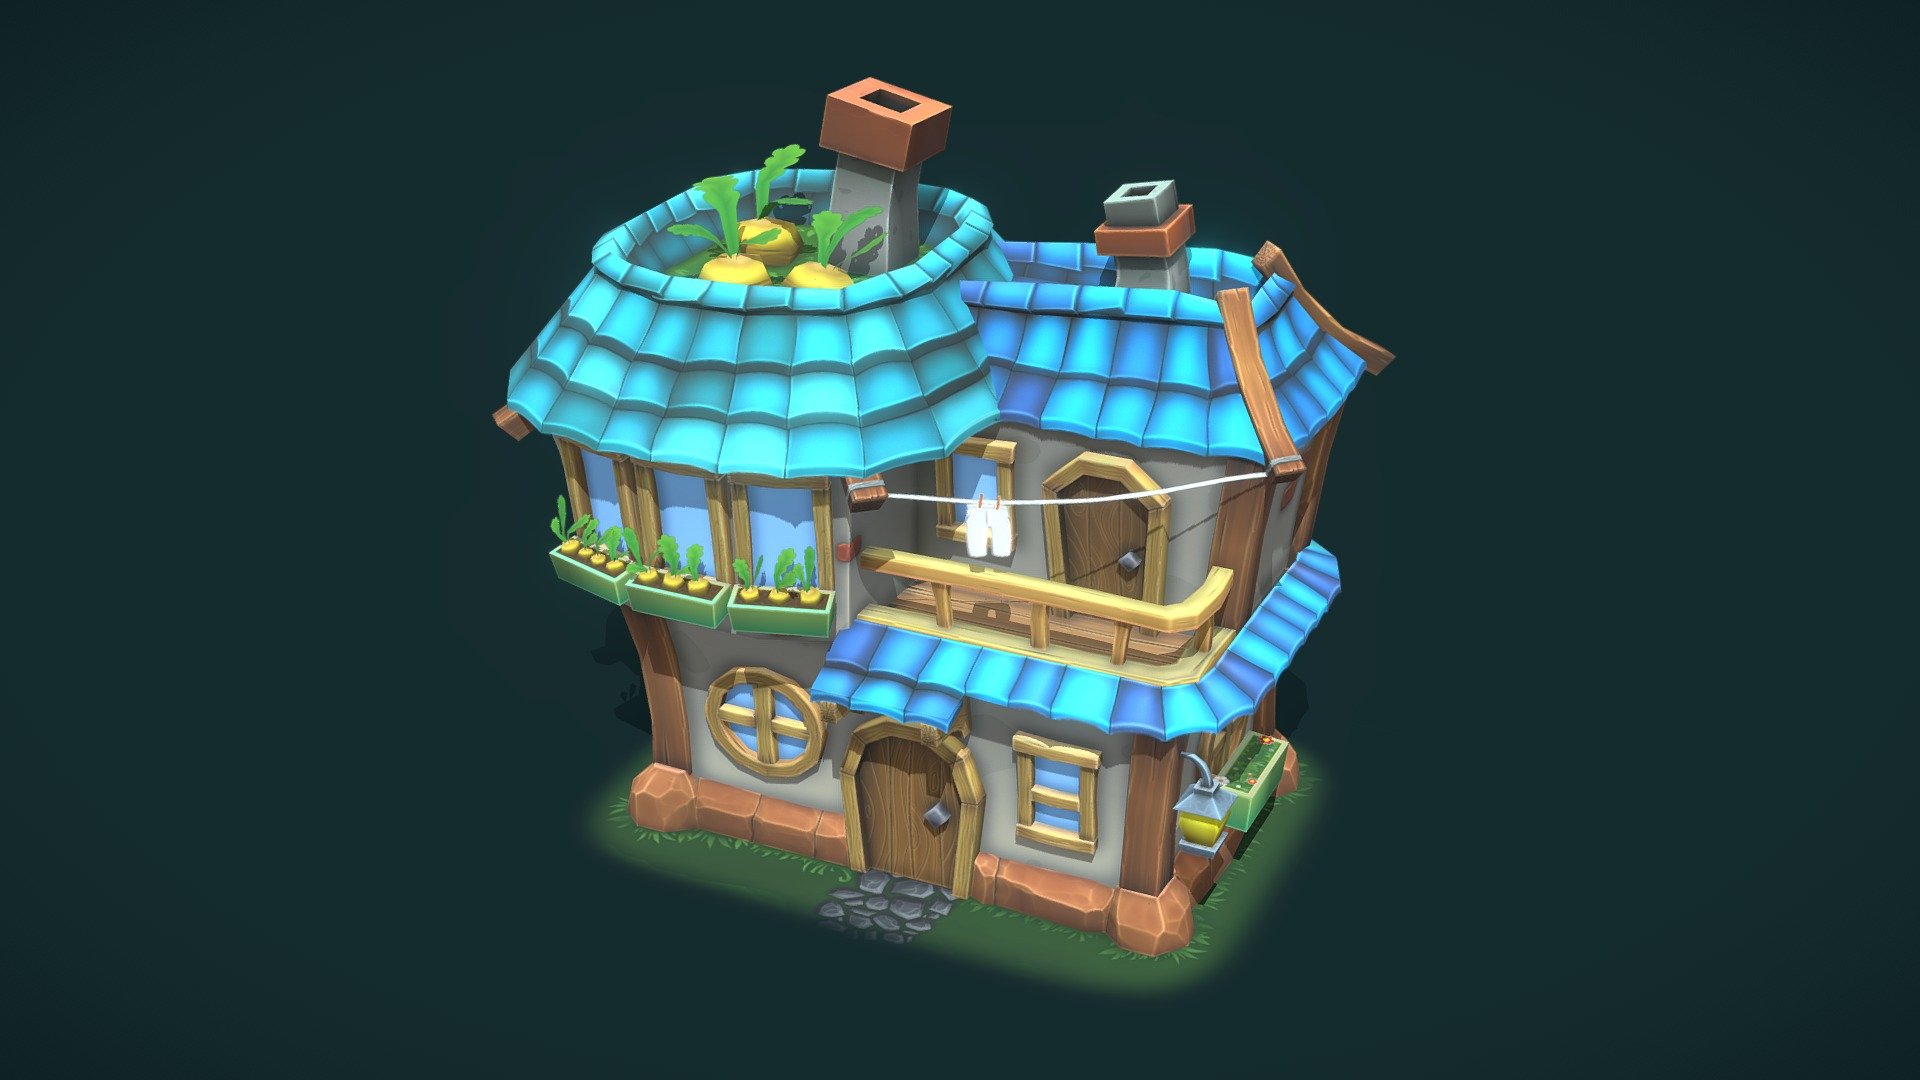 Rabbit house made for entrance test. Some parts was baked from high poly, some was full handpainted 3d model